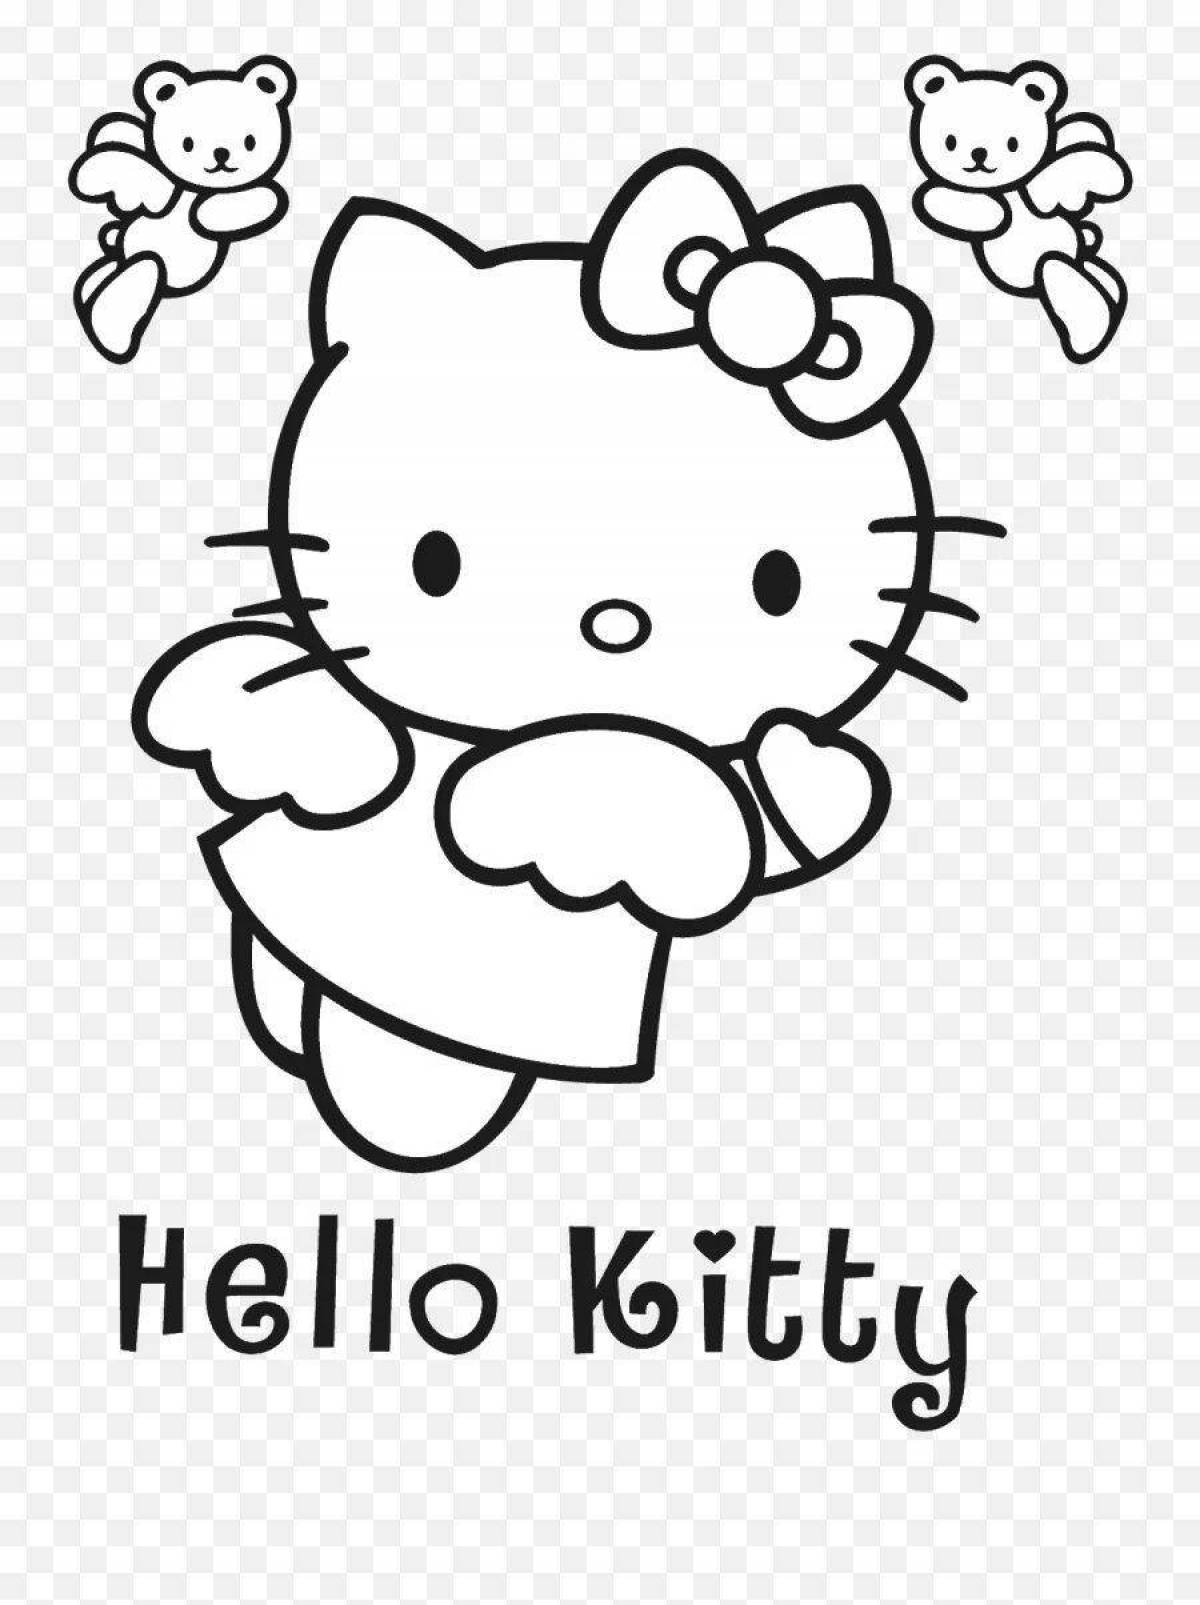 Cute hello kitty head coloring page